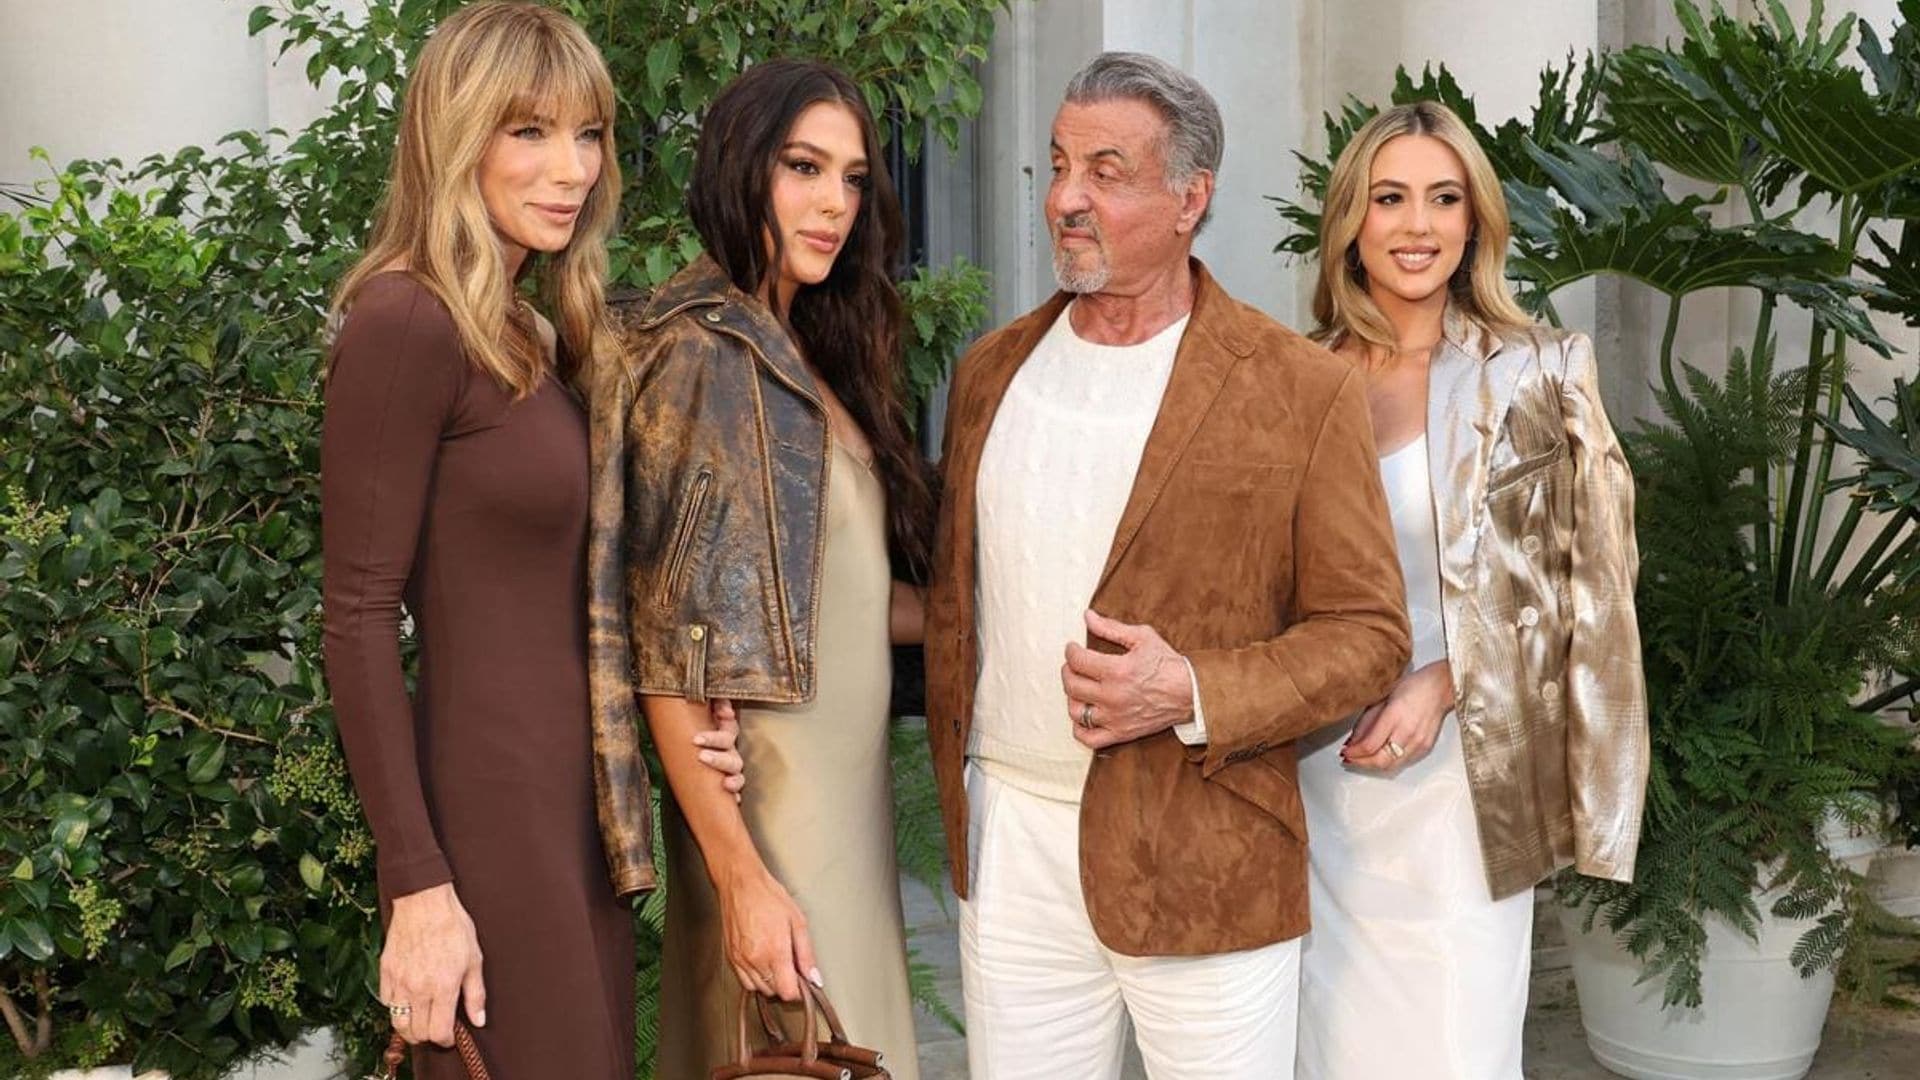 Sylvester Stallone’s new reality show starring Jennifer Flavin and their three daughters